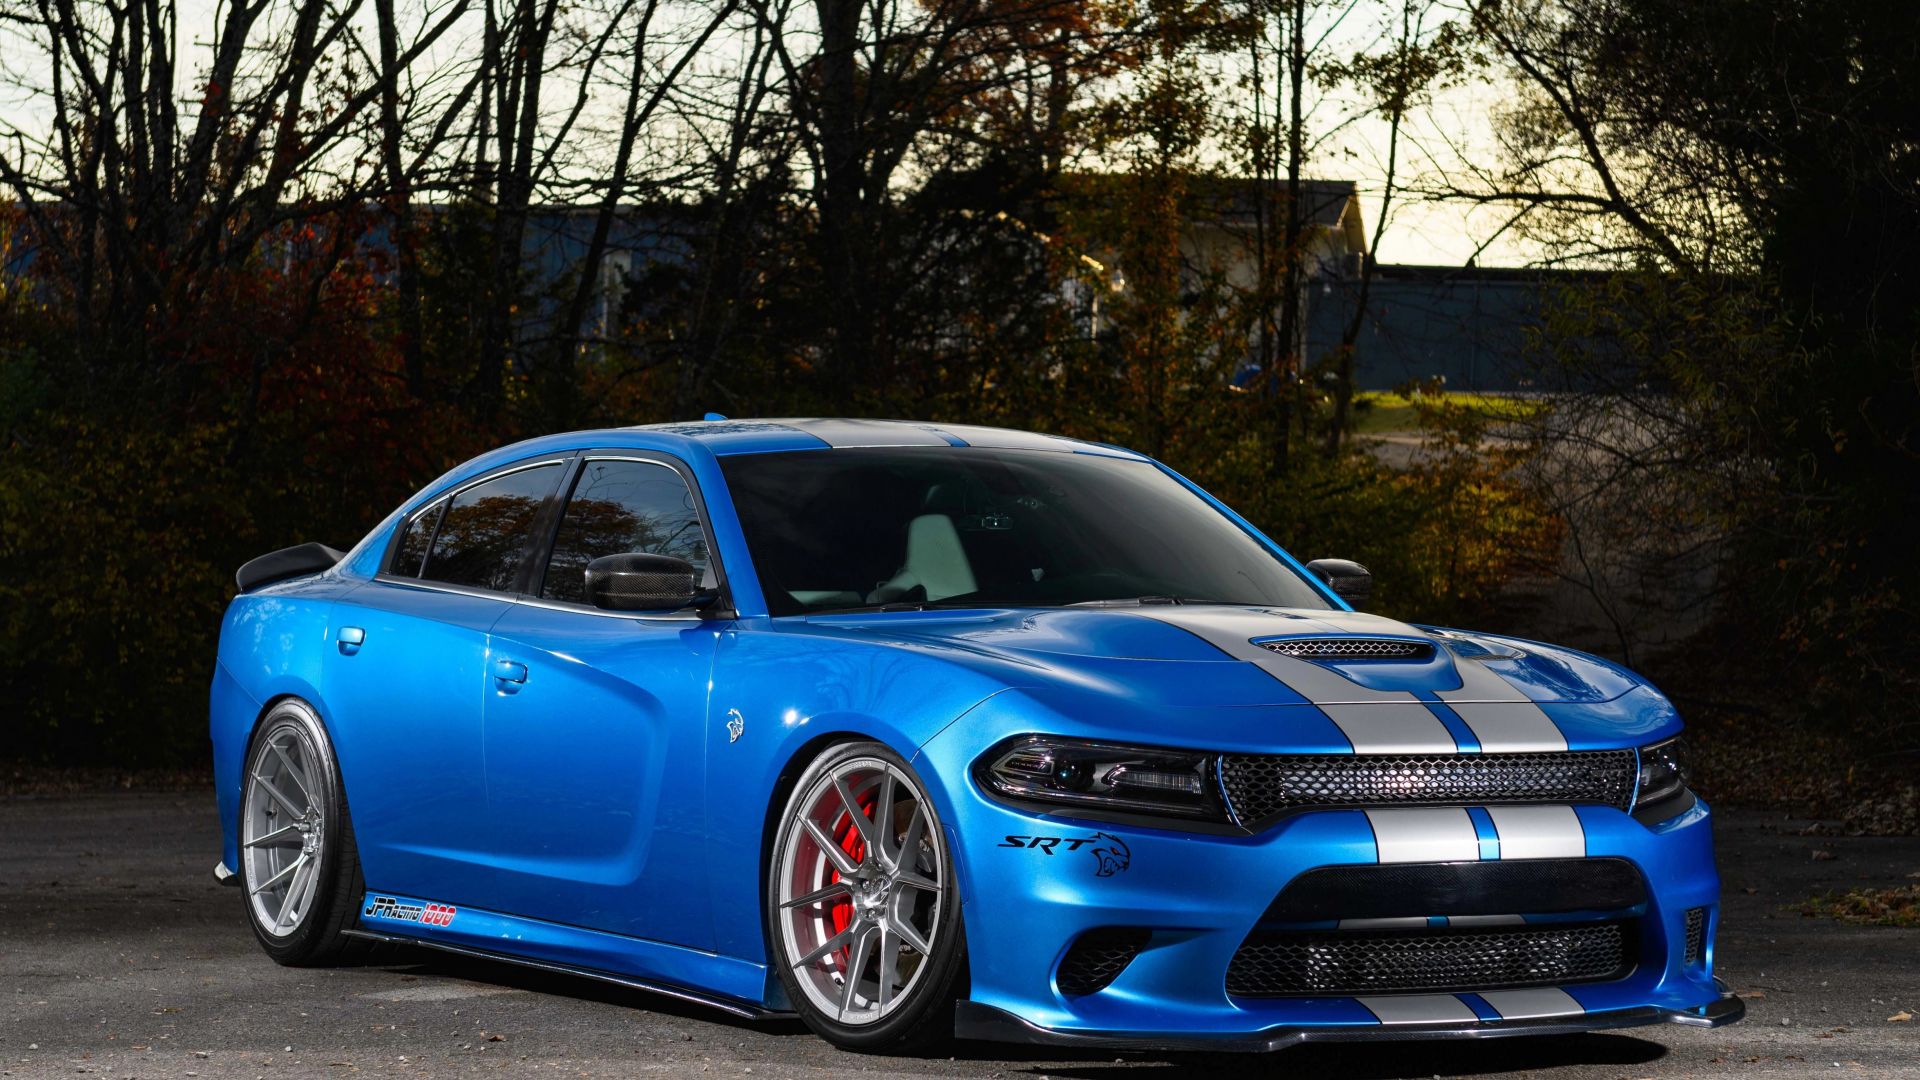 Download Dodge Charger wallpapers for mobile phone free Dodge Charger  HD pictures